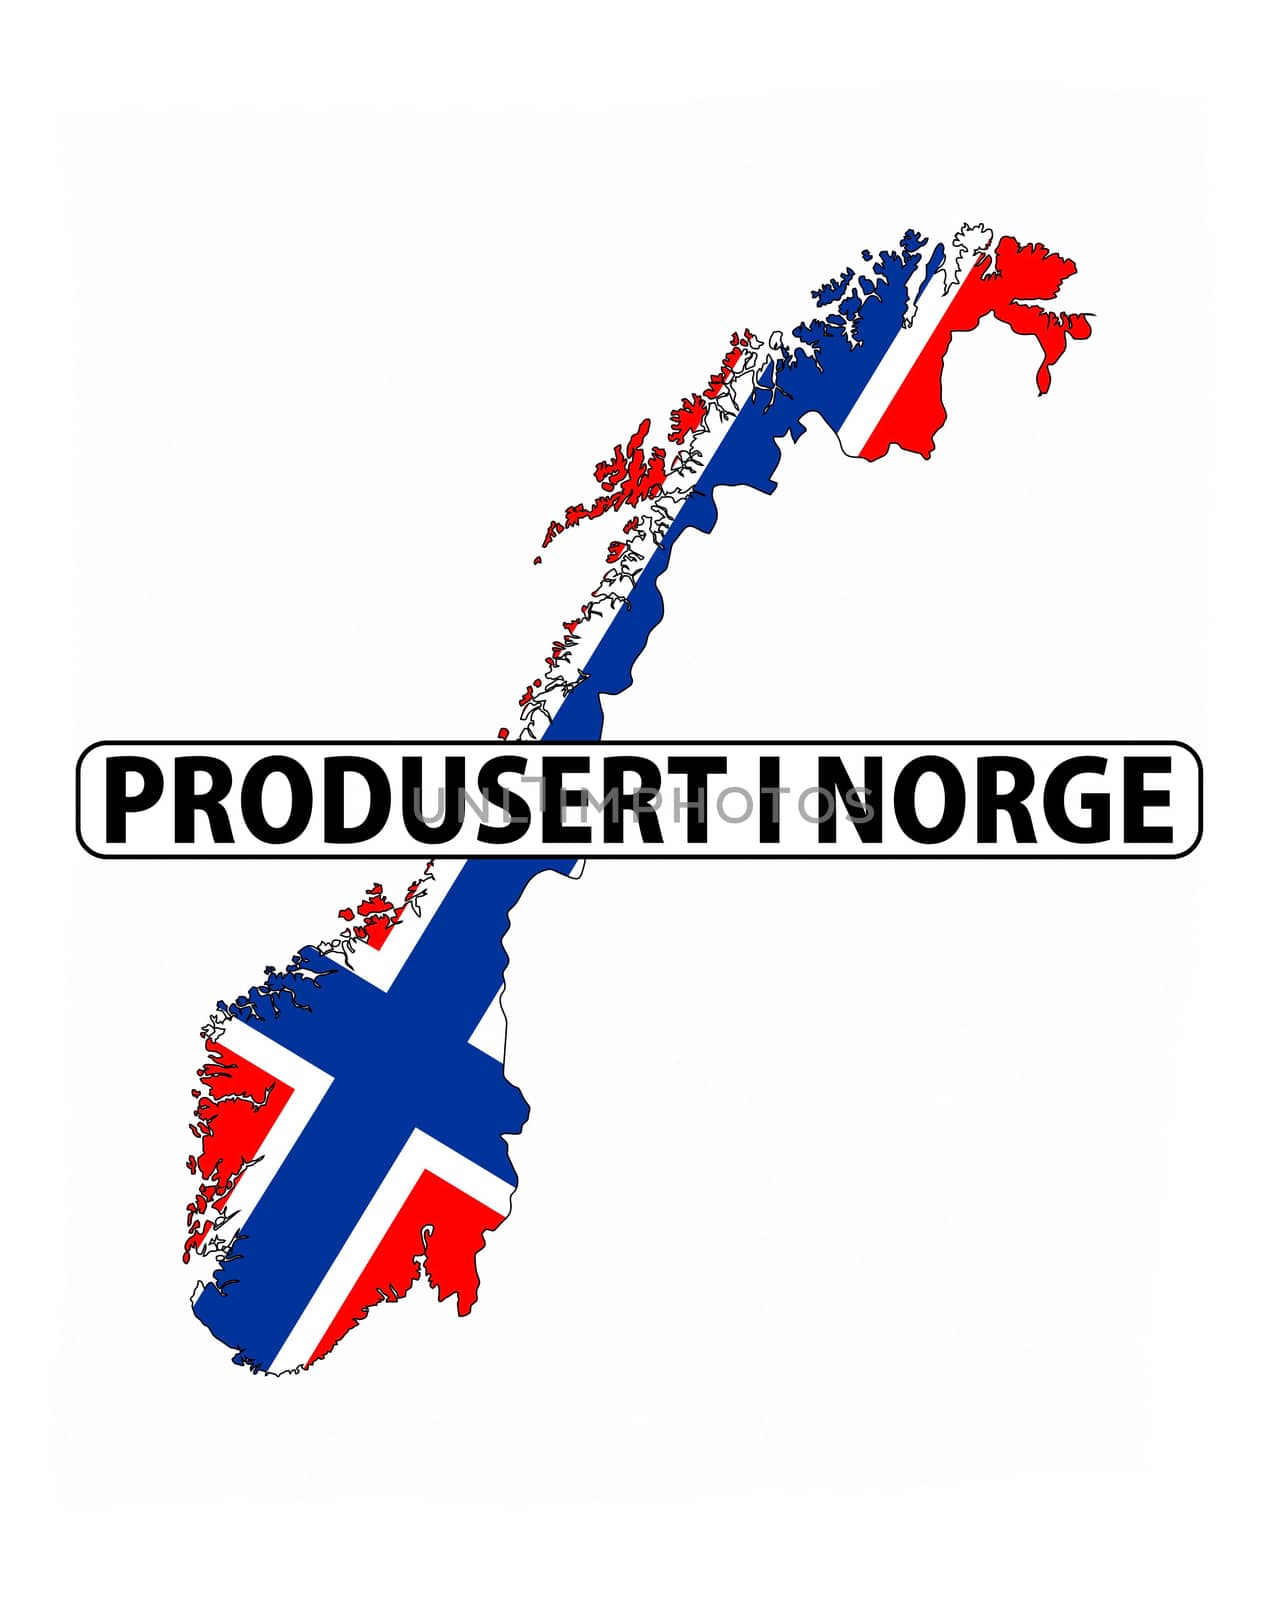 made in norway by tony4urban